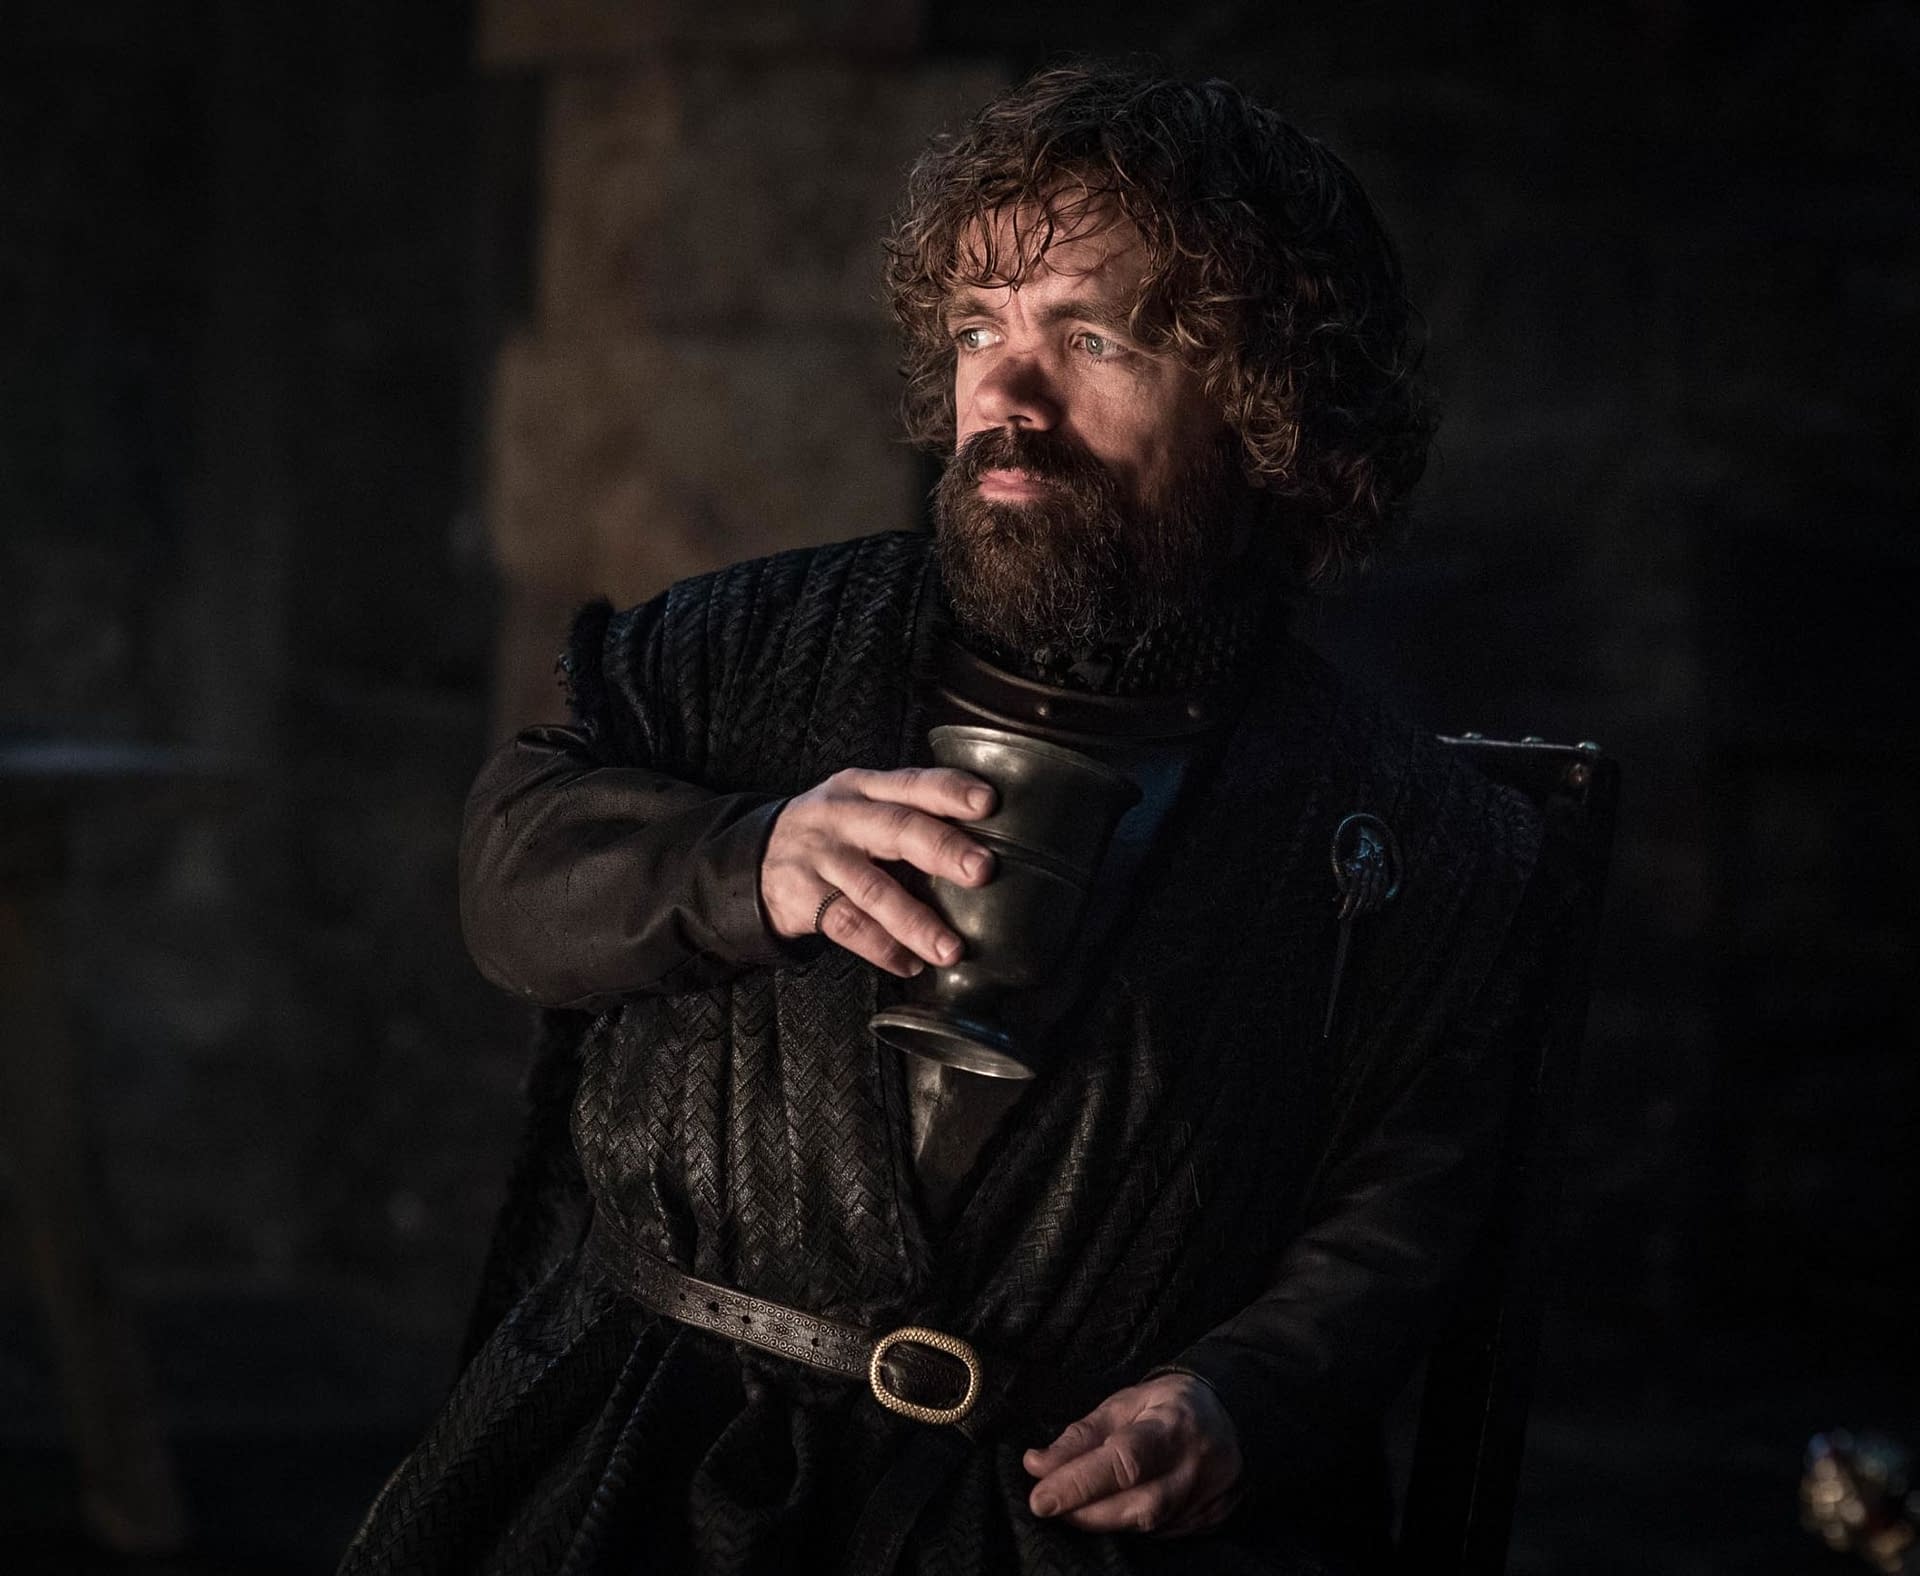 Whoops, 'Game of Thrones' Season 8 Goes 2-For-2 with Episode Leaks